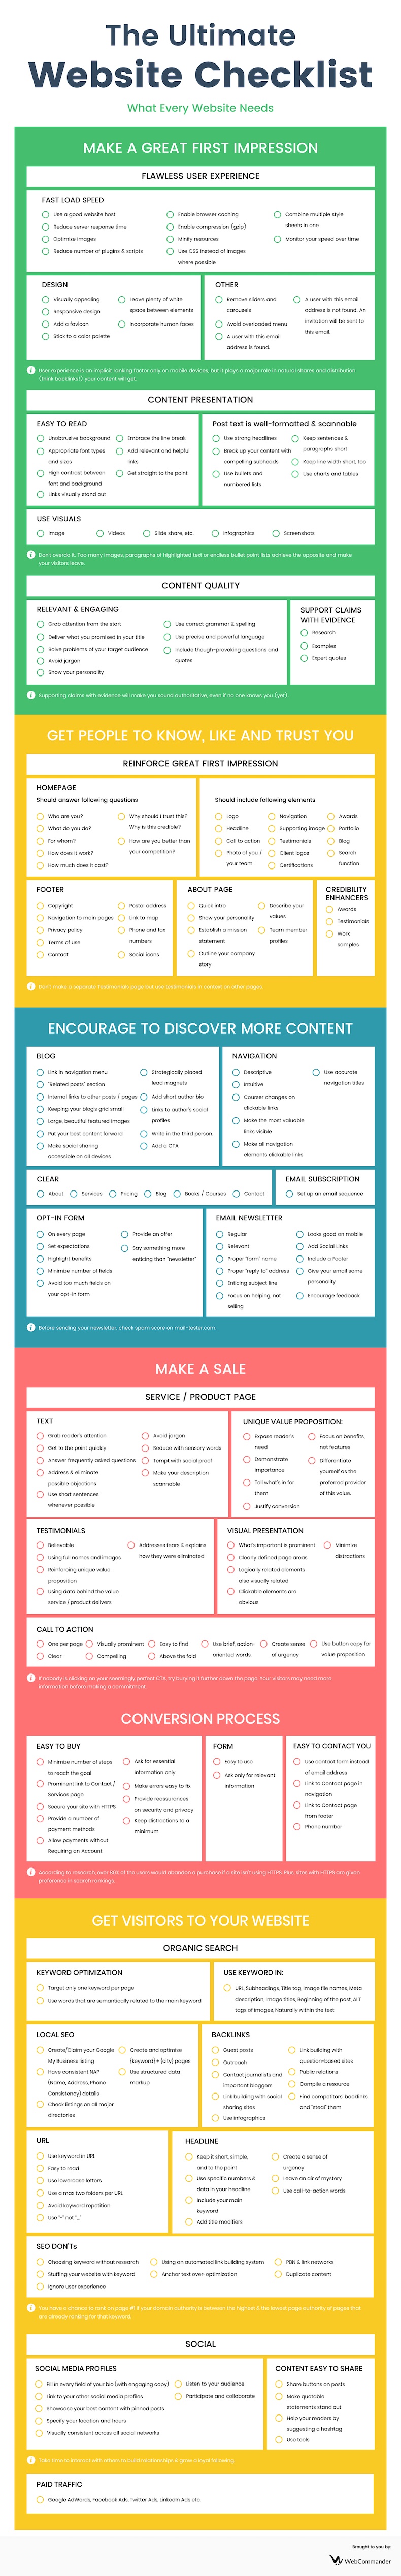 The ultimate website checklist infographic